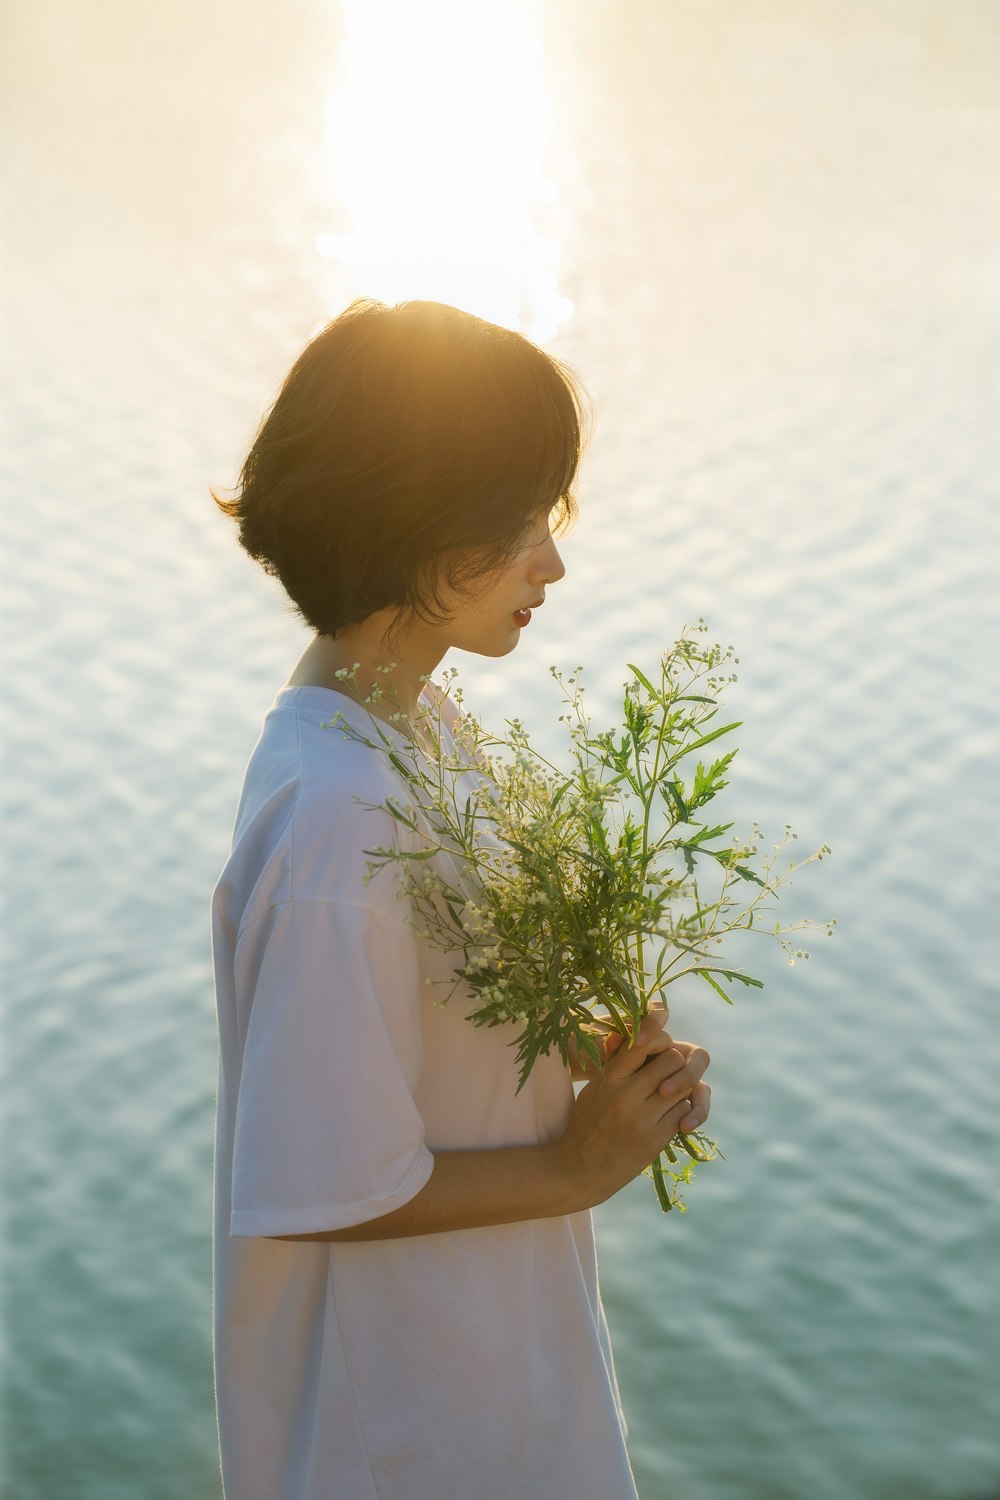 woman in white shirt holding green plant